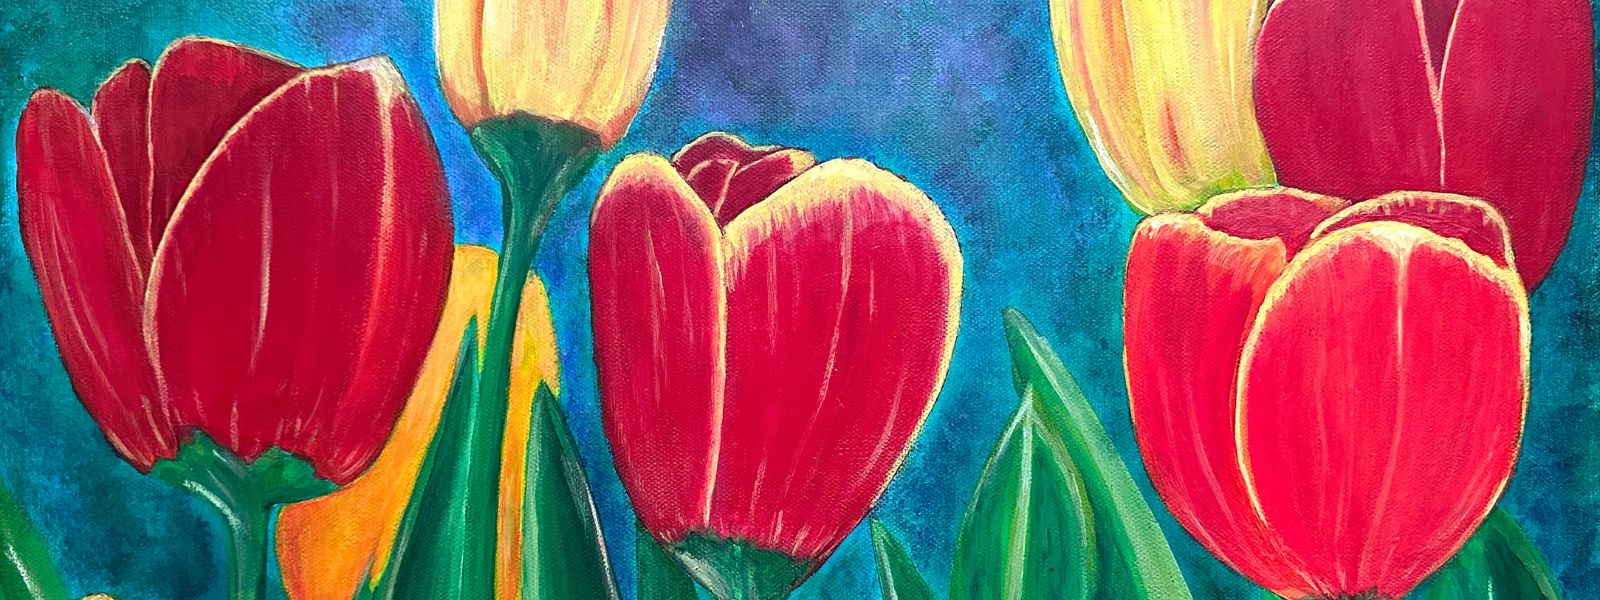 Painting of tulips by Mita for Off the Wall 2023